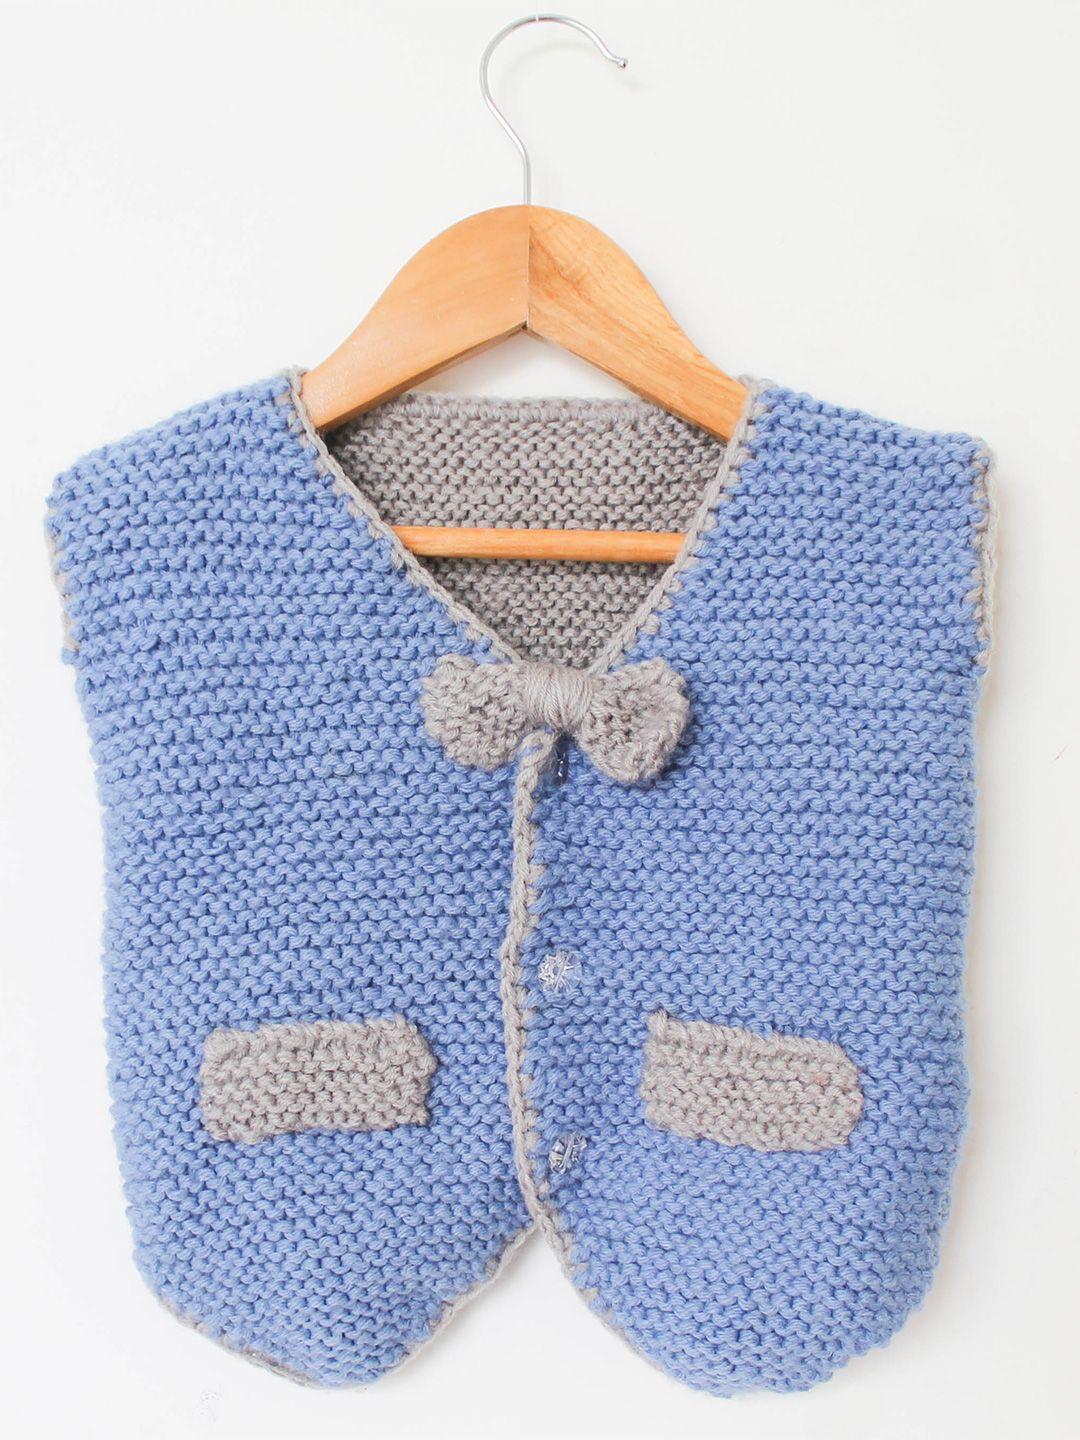 woonie-unisex-kids-cable-knit-acrylic-sweater-vest